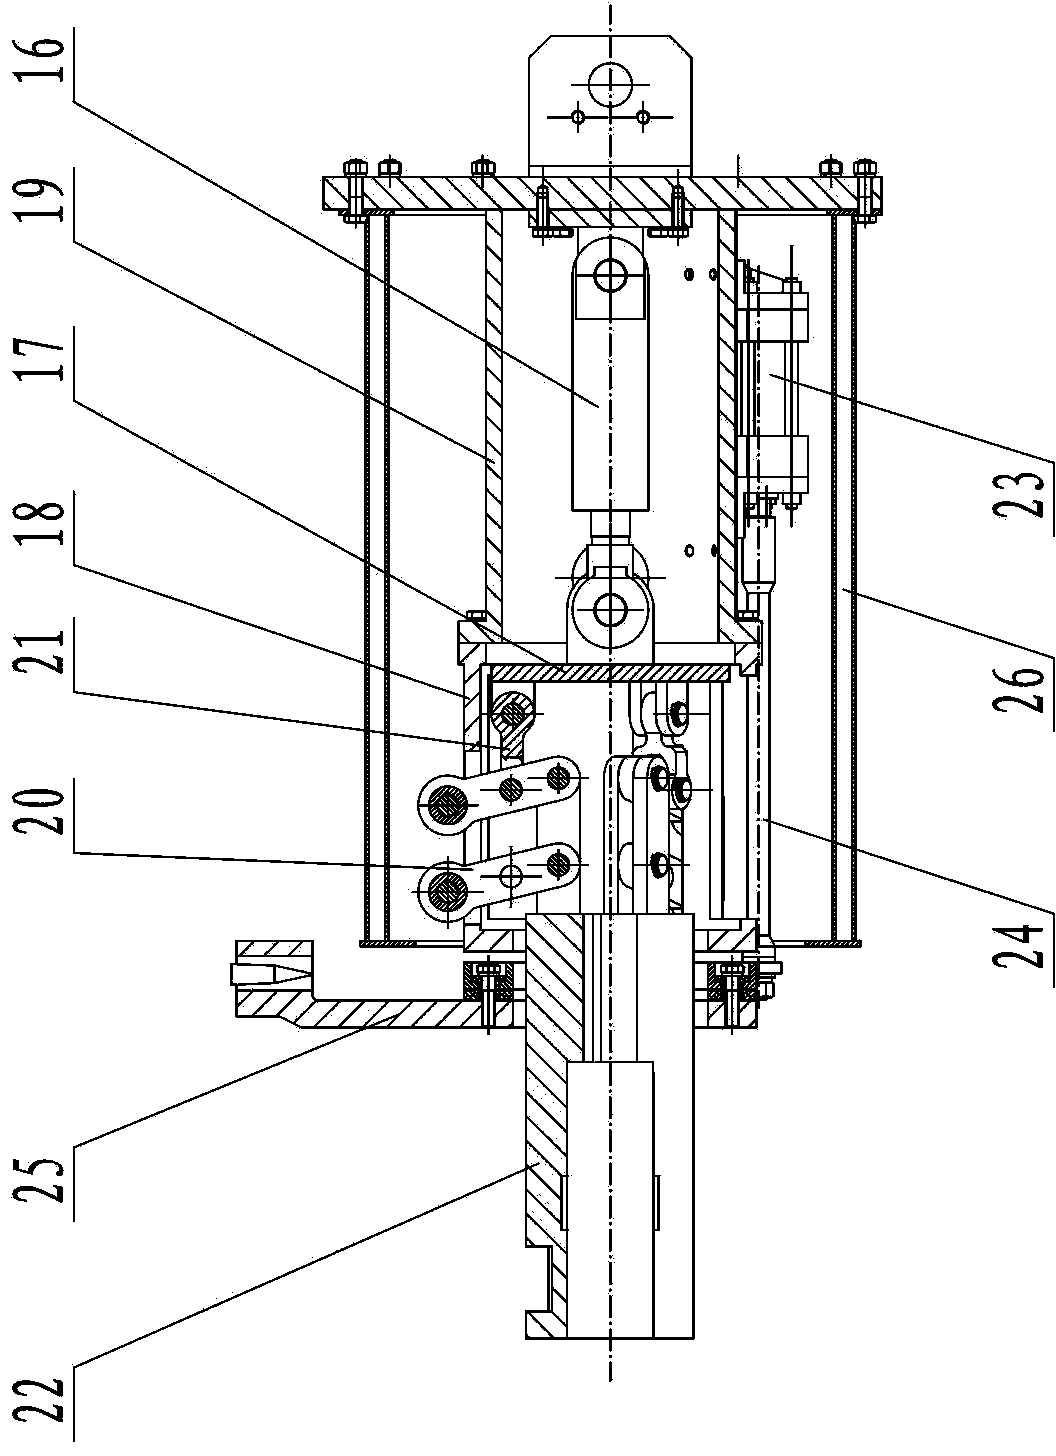 Automatic discharge device of calcium carbide furnace